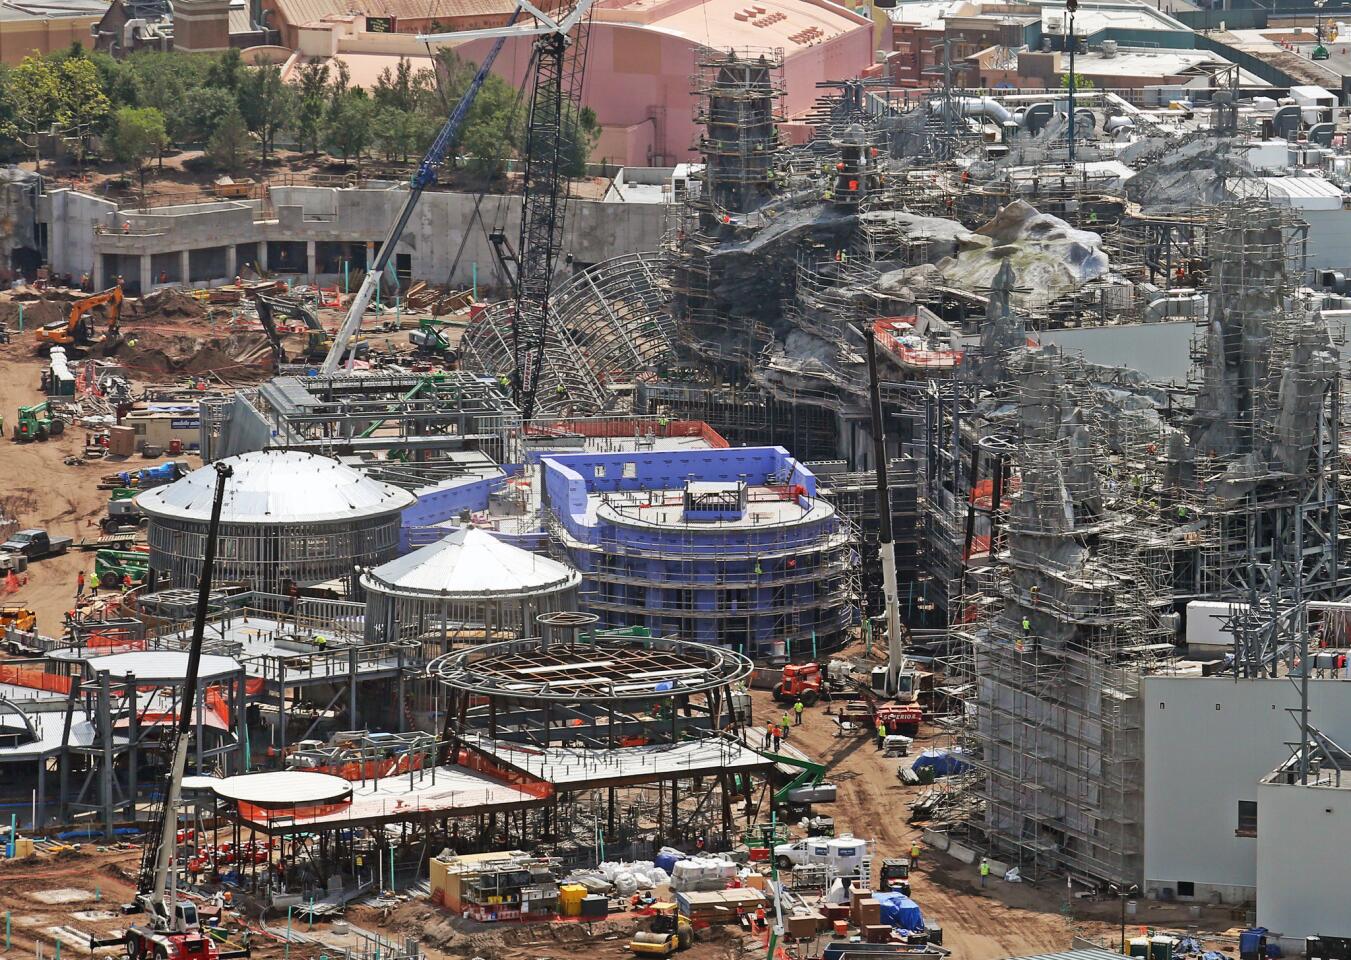 An aerial view of construction Tuesday, June 5, 2018 at Galaxy's Edge an upcoming Star Wars-themed area being developed at Disney's Hollywood Studios at Walt Disney World in Orlando, Florida. (Red Huber/Staff Photographer)